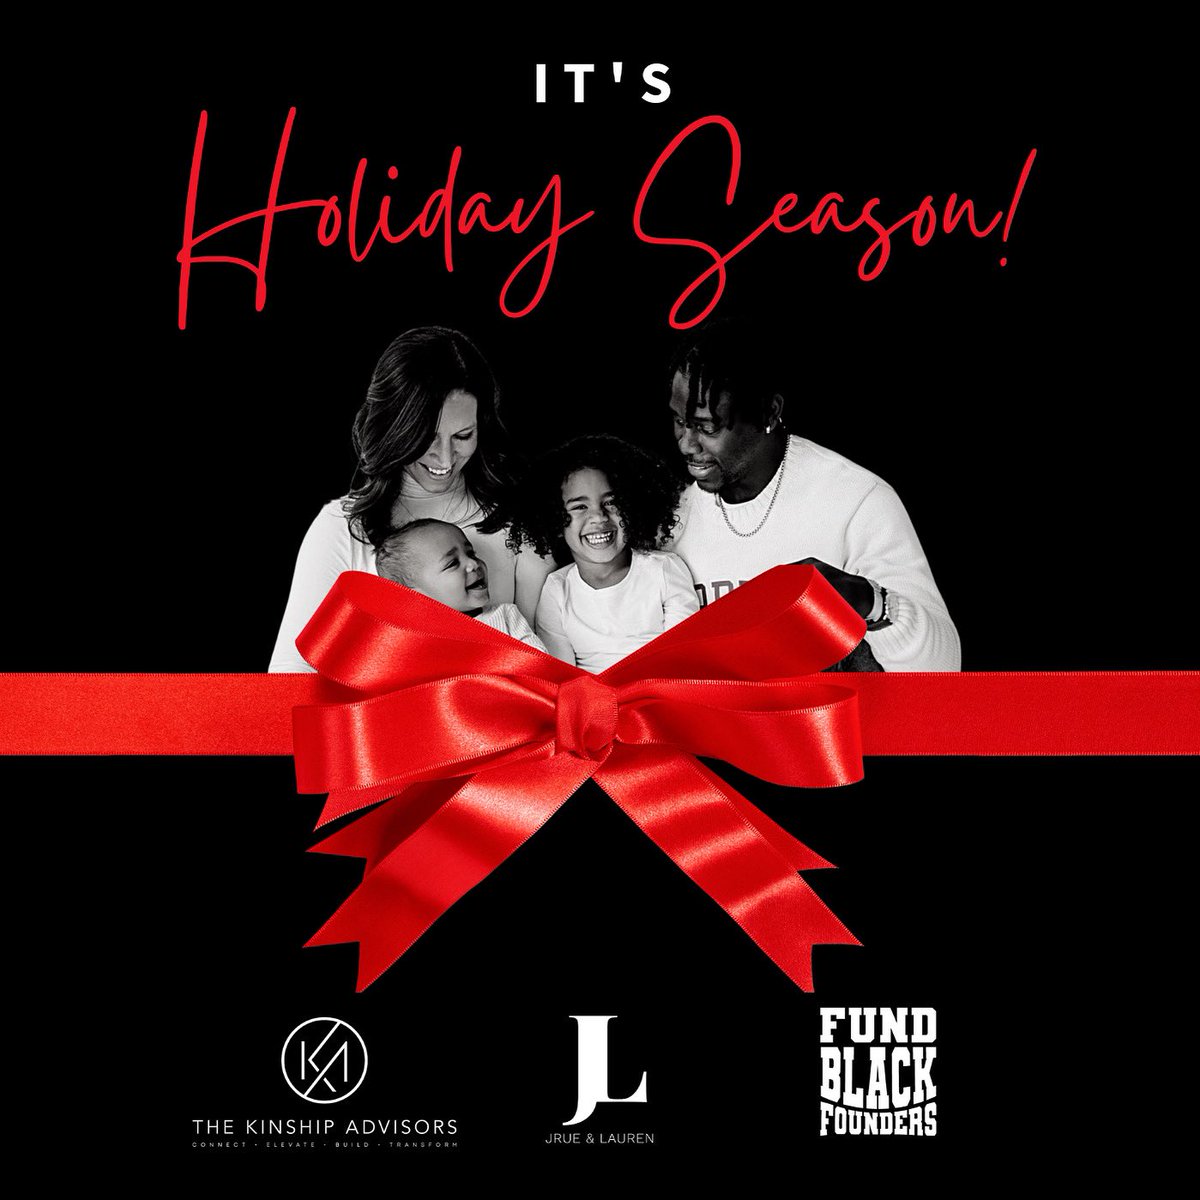 Happy Holidays! 🎄 As you do your shopping for loved ones, remember to give & gift Black this Holiday season! When you invest in Black owned businesses & nonprofits, you are supporting Black families & Black futures! 🤎 #giveblack #giftblack #blackowned #holidayszn #jlhfund